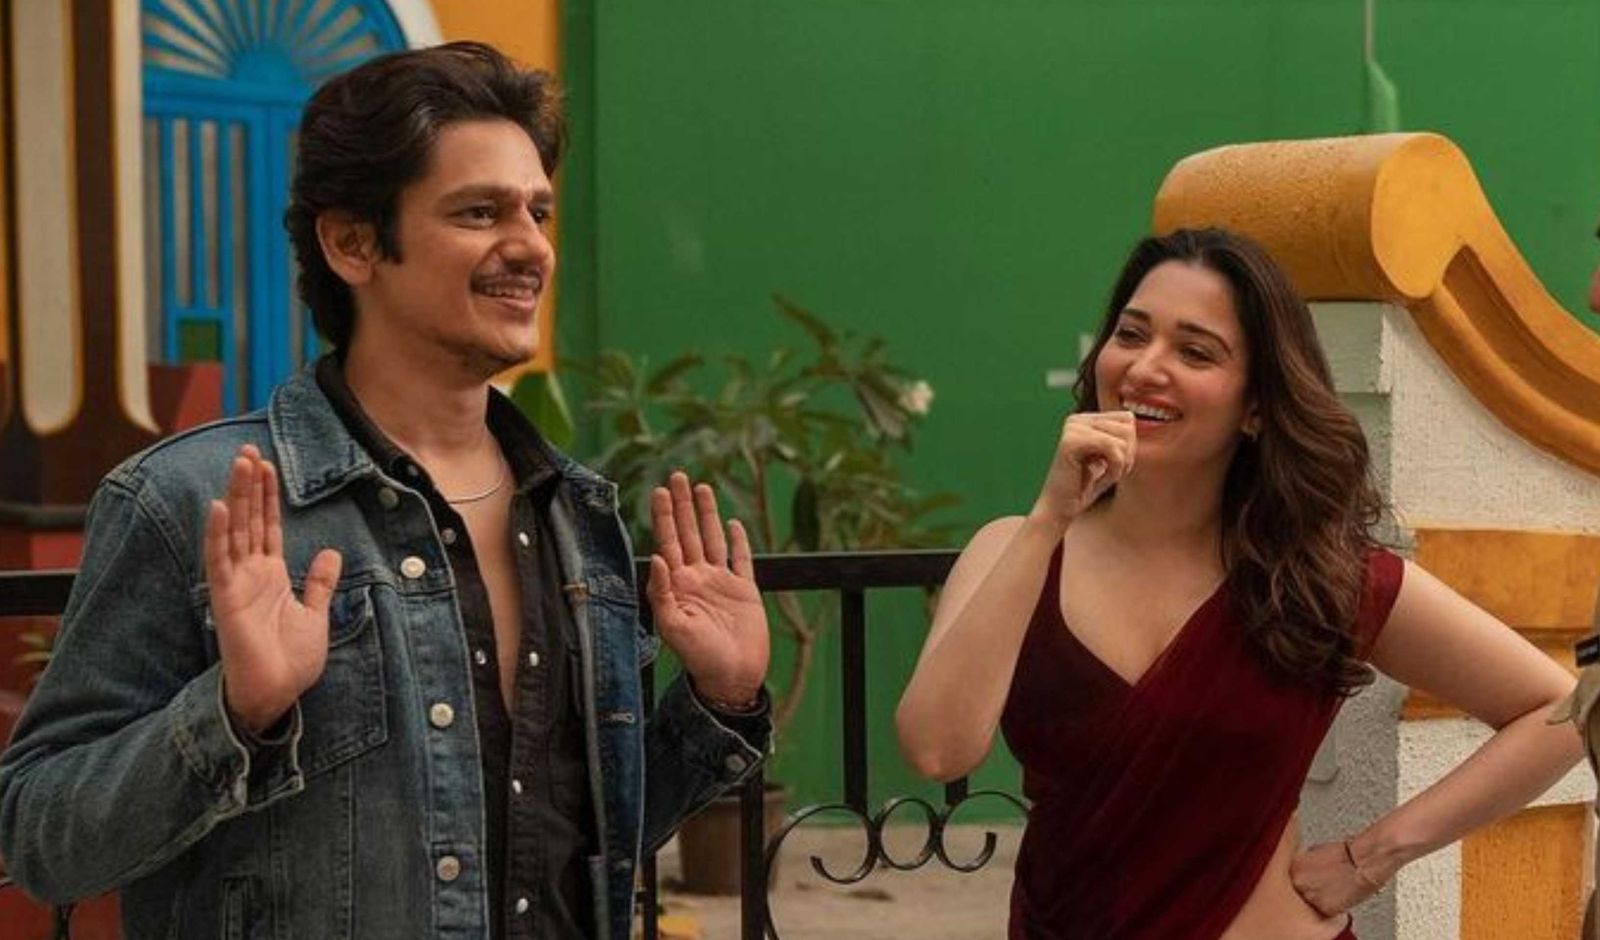 Tamannaah Bhatia and Vijay Varma take a break from stepping out together after confessing their love; here’s why